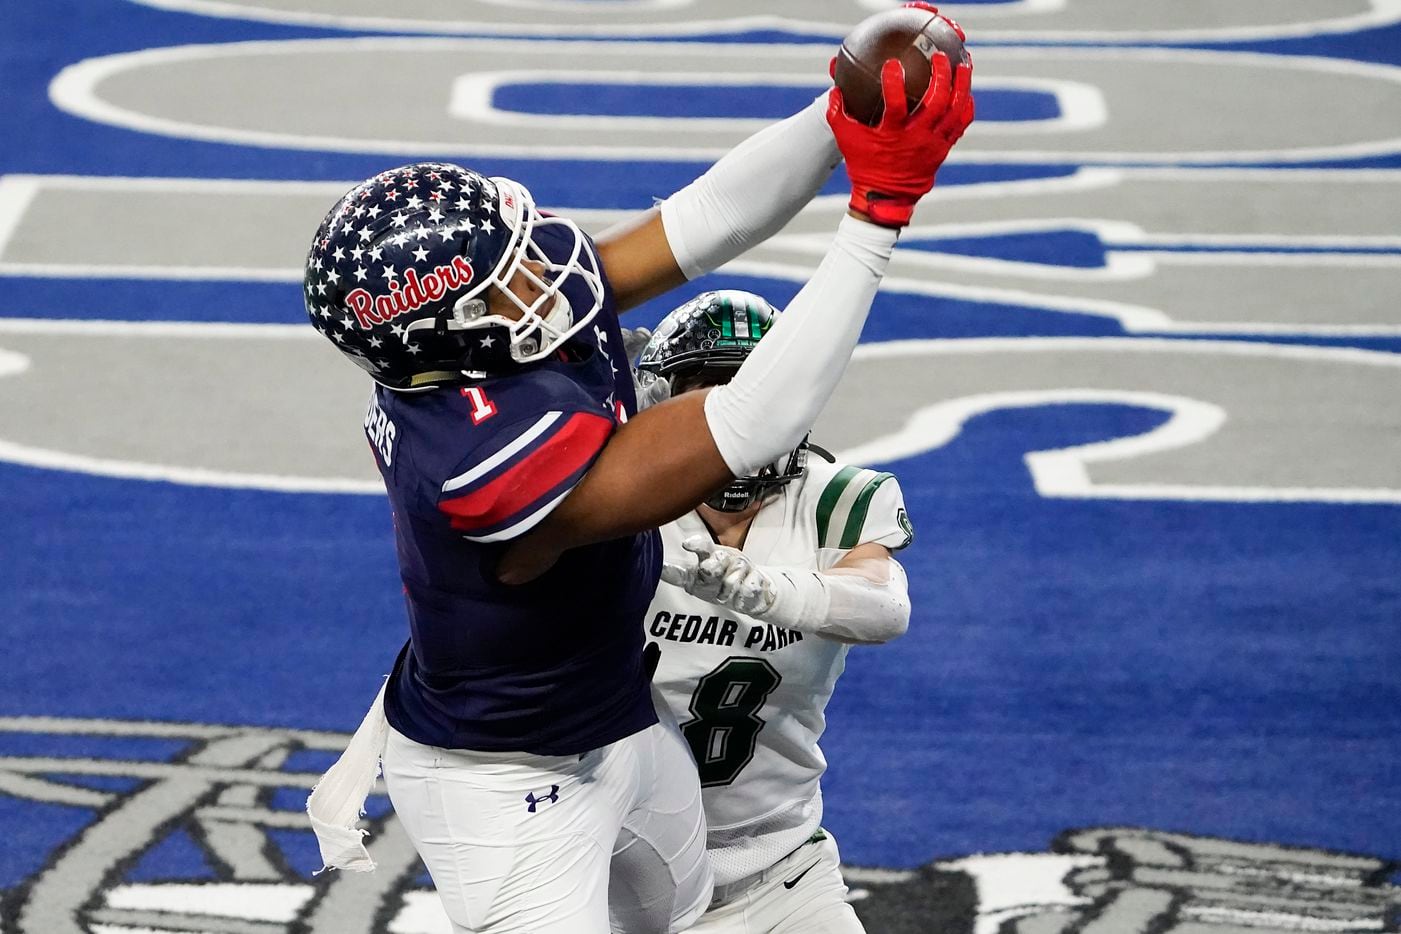 Denton Ryan wide receiver Ja'Tavion Sanders (1) catches a touchdown pass from quarterback Seth Henigan as Cedar Park defensive back Casyn Wiesenhutter (8) defends during the second half of the Class 5A Division I state football championship game at AT&T Stadium on Friday, Jan. 15, 2021, in Arlington, Texas. Ryan won the game 59-14. (Smiley N. Pool/The Dallas Morning News)